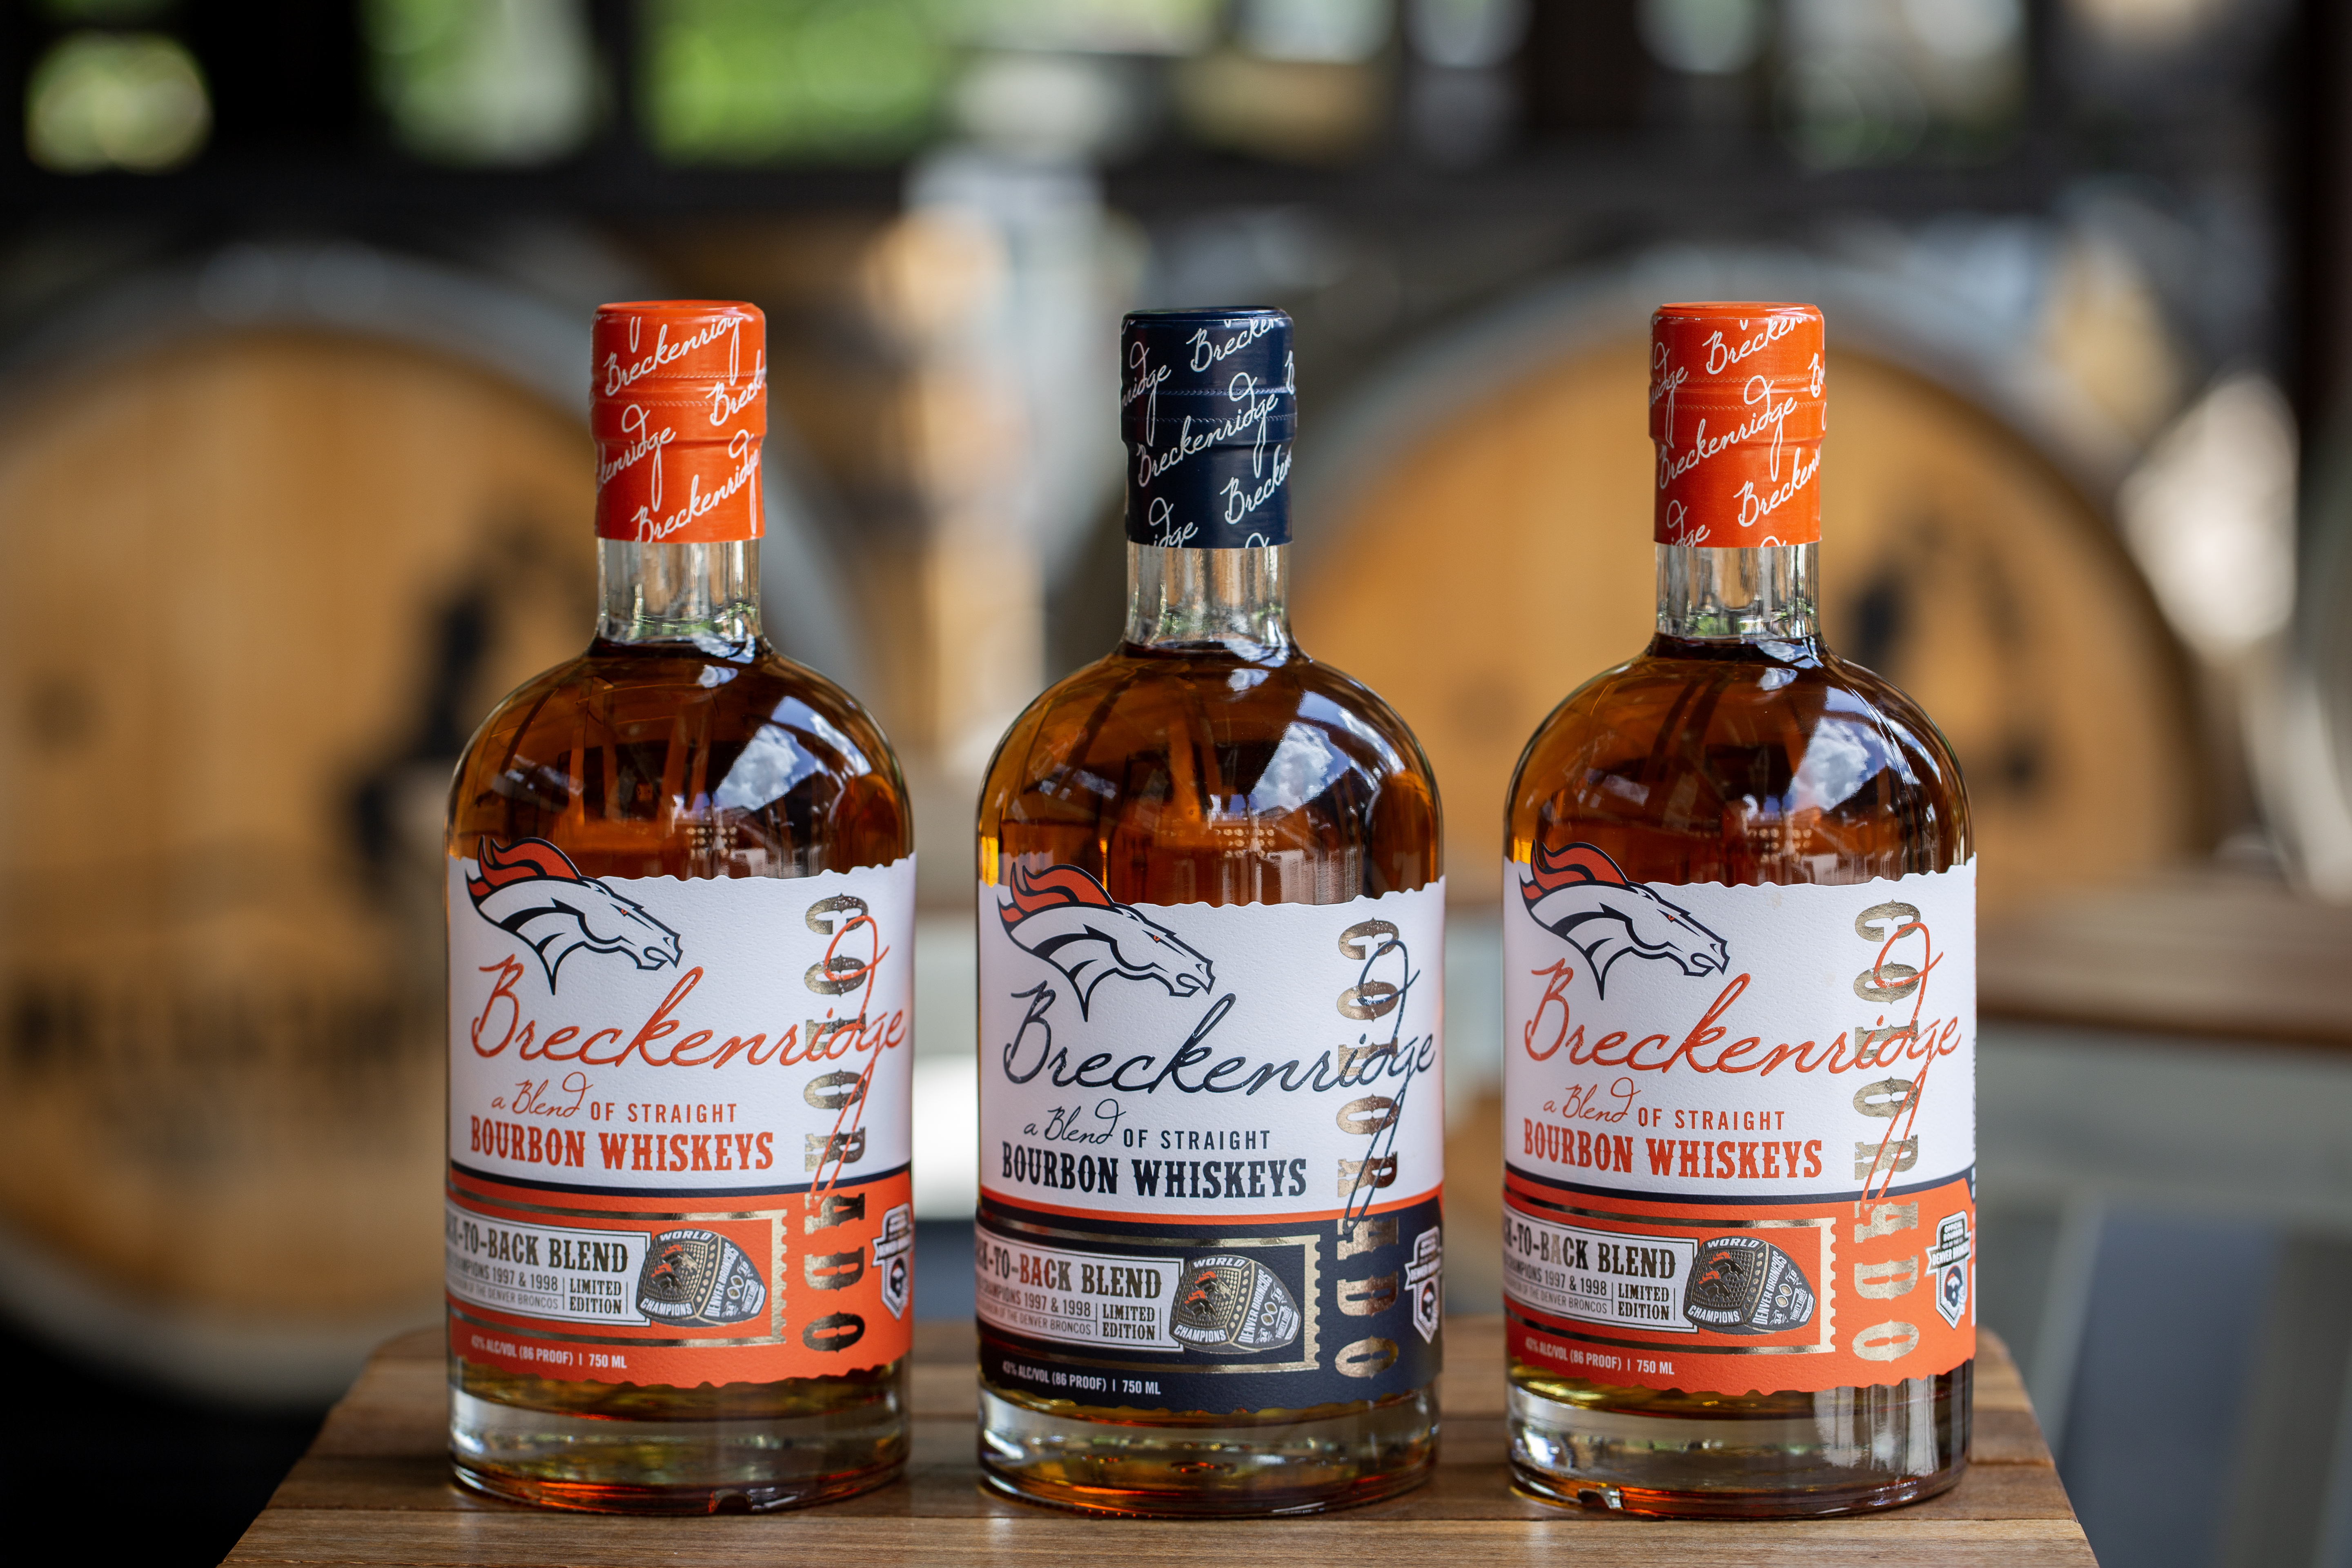 Breckenridge Distillery Announces New and Expanded Partnership with the Denver Broncos